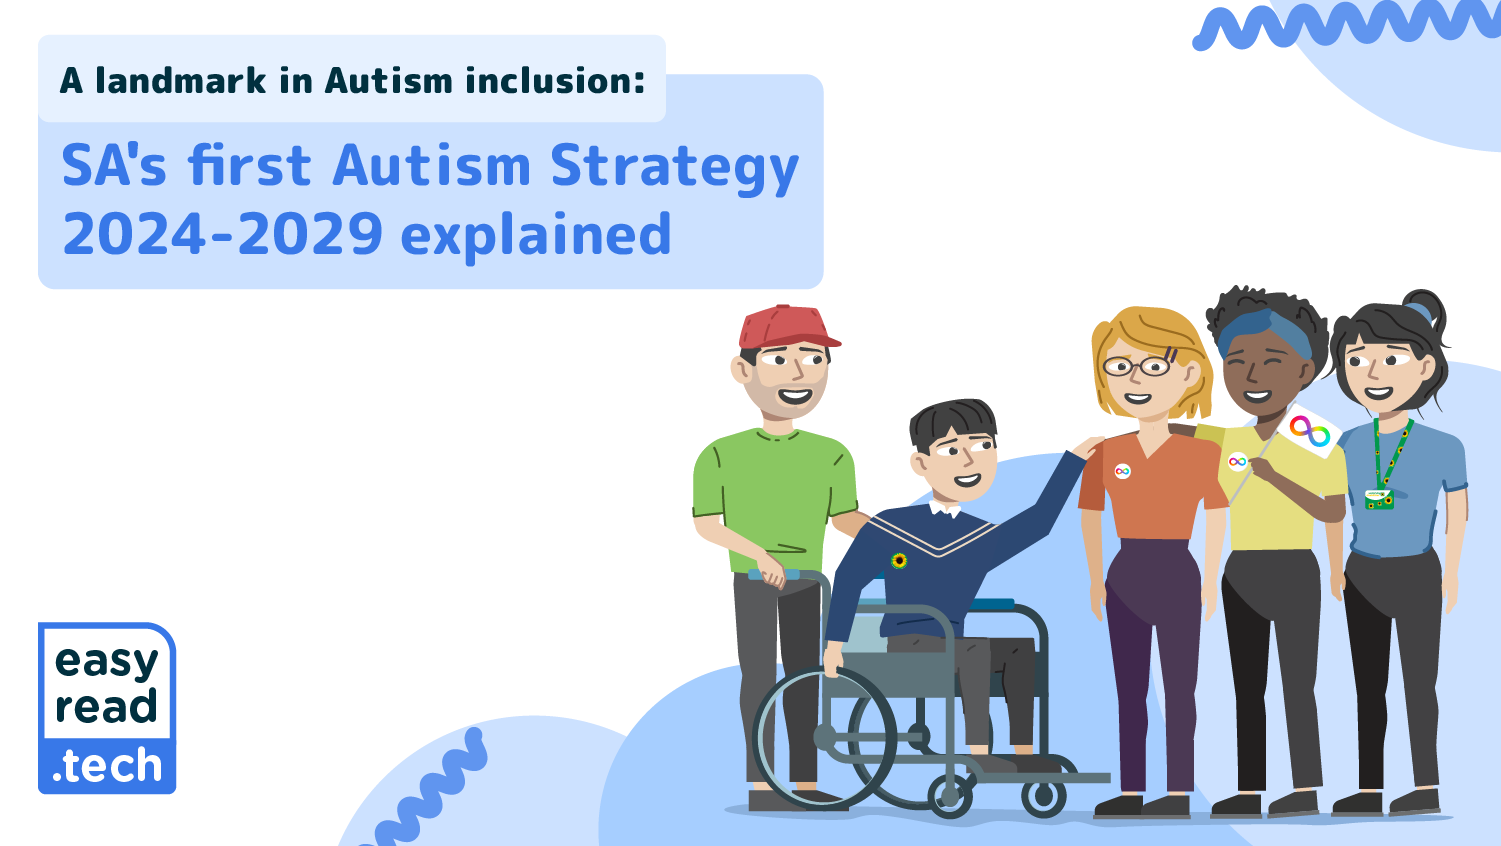 A landmark in Autism inclusion. SA's first Autism Strategy 2024 to 2029 explained. Easy read dot tech. 